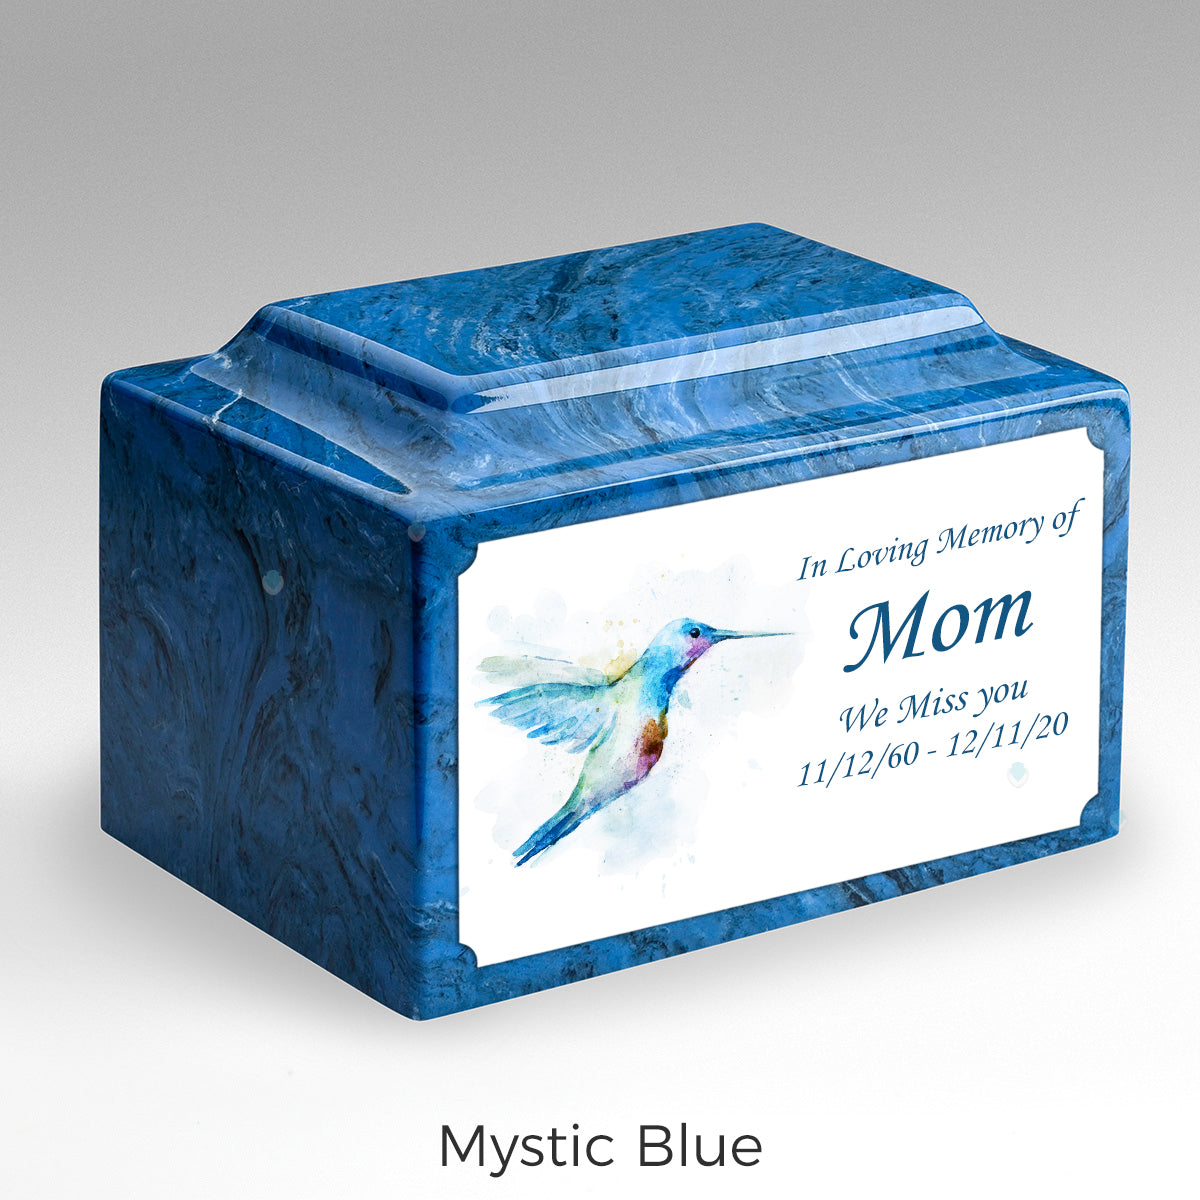 Cremation Urns For Human Ashes, Cremation Urns For Sale